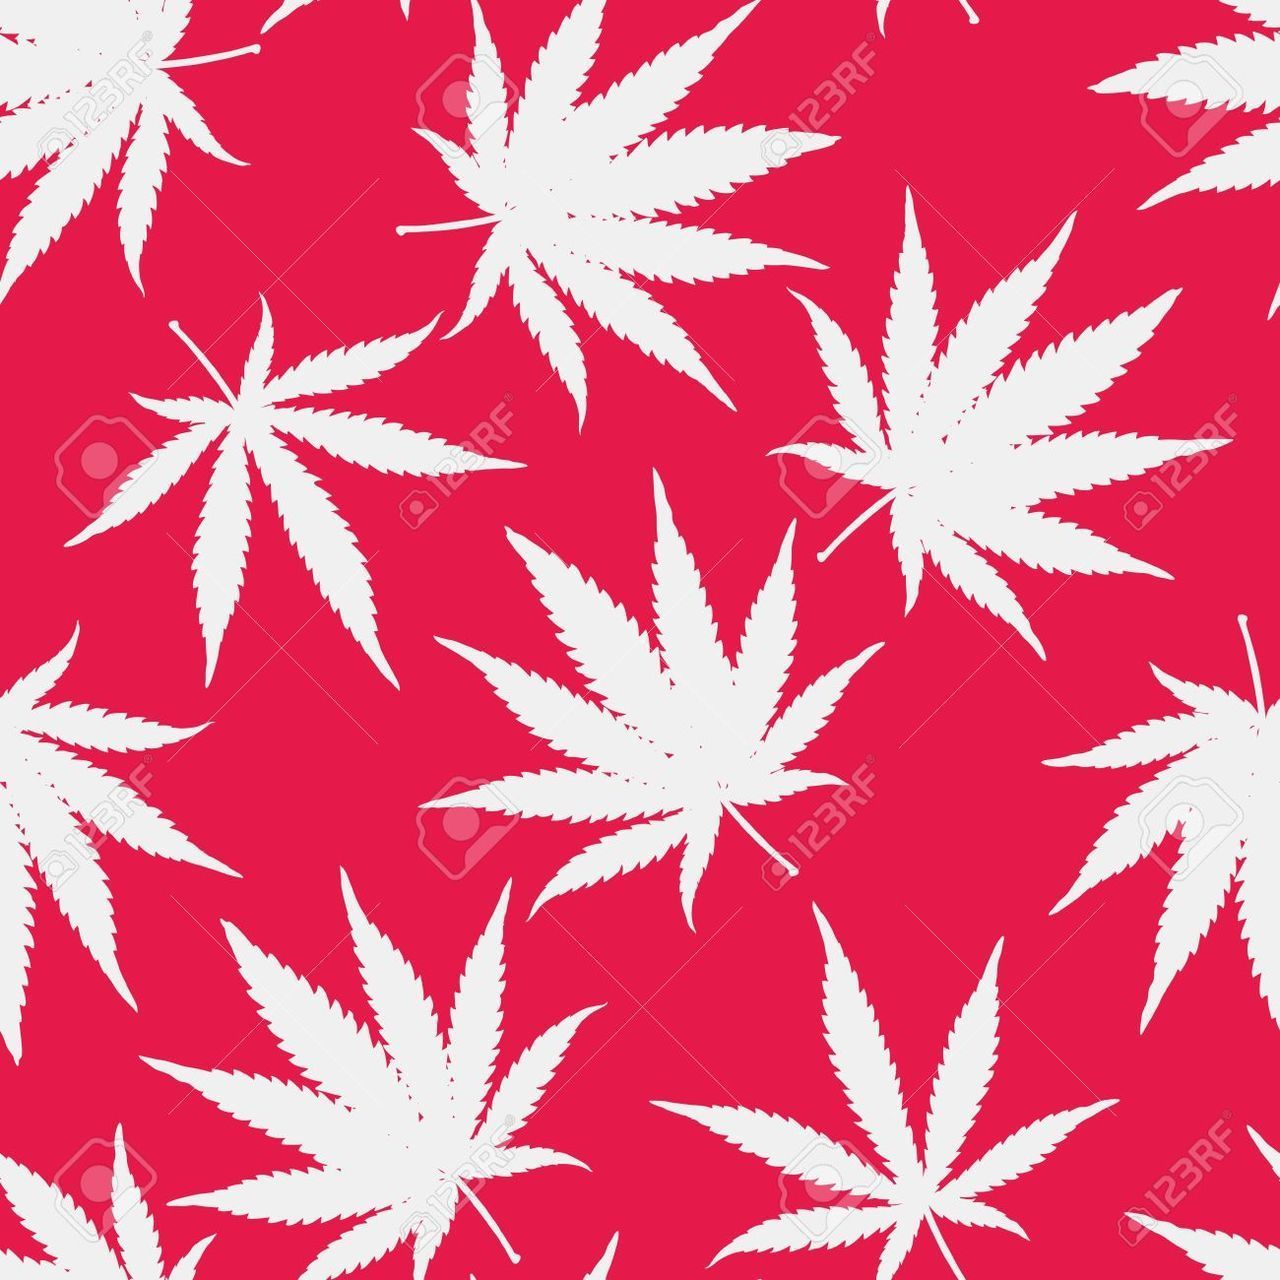 Red Weed Wallpaper Shared By Amyjames On We Heart It